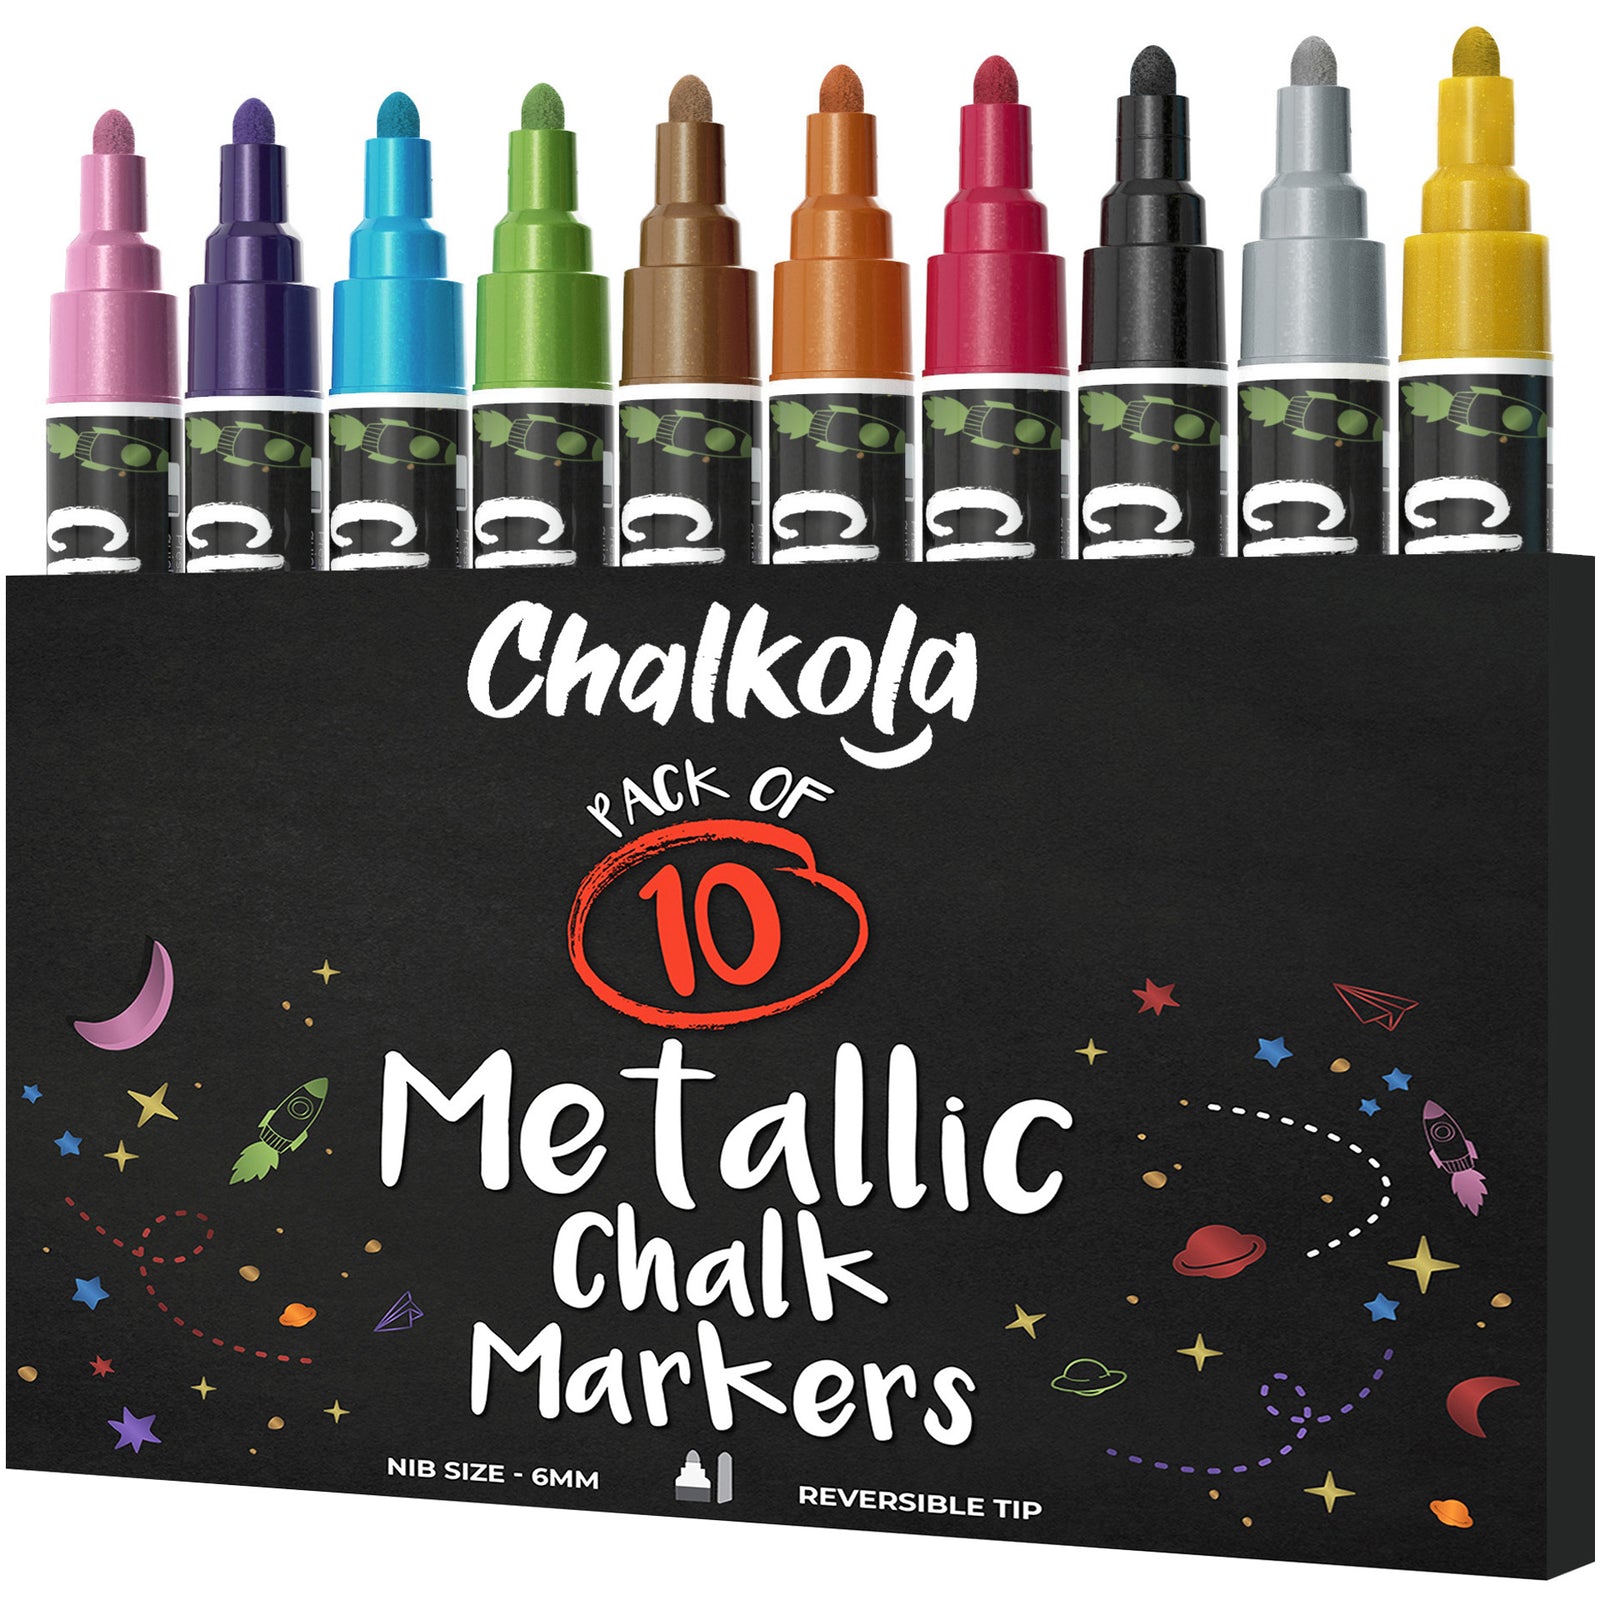 Liquid Chalk Markers with Gold & Silver - 6mm Reversible Nib